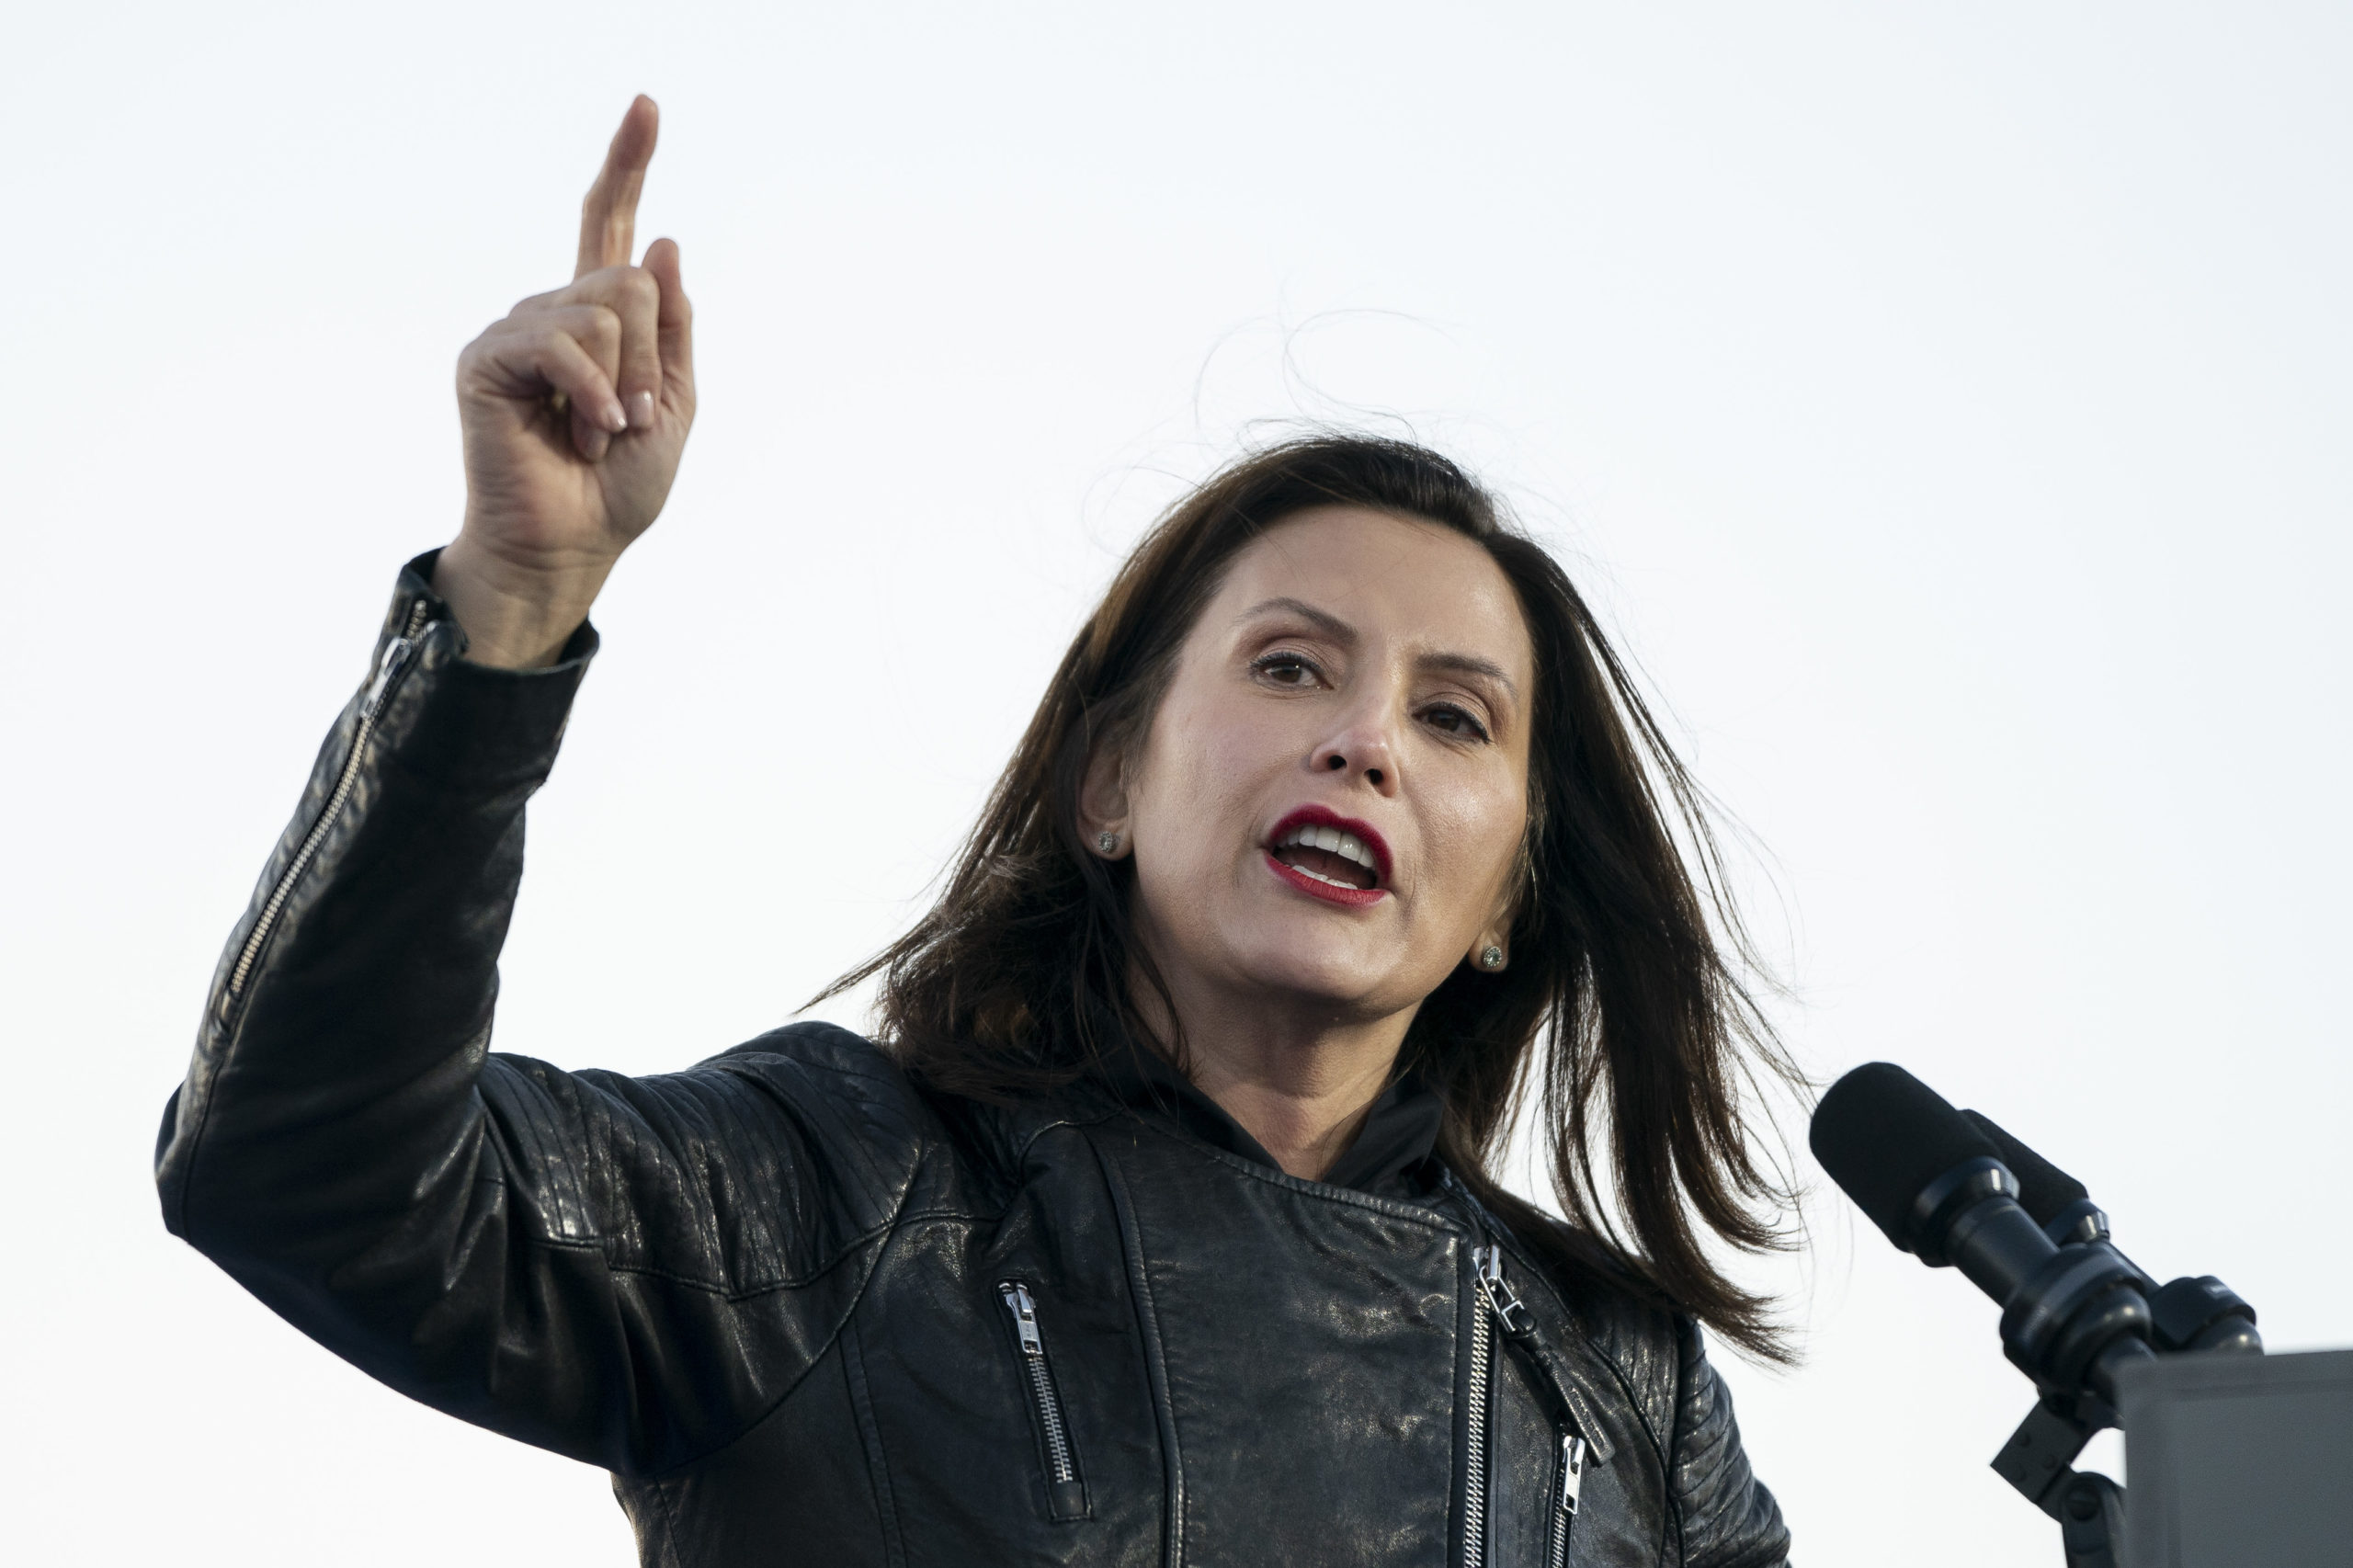 DETROIT, MI - OCTOBER 31: Gov. Gretchen Whitmer speaks during a drive-in campaign rally with Democratic presidential nominee Joe Biden and former President Barack Obama at Belle Isle on October 31, 2020 in Detroit, Michigan. Biden is campaigning with Obama on Saturday in Michigan, a battleground state that President Donald Trump narrowly won in 2016. (Photo by Drew Angerer/Getty Images)